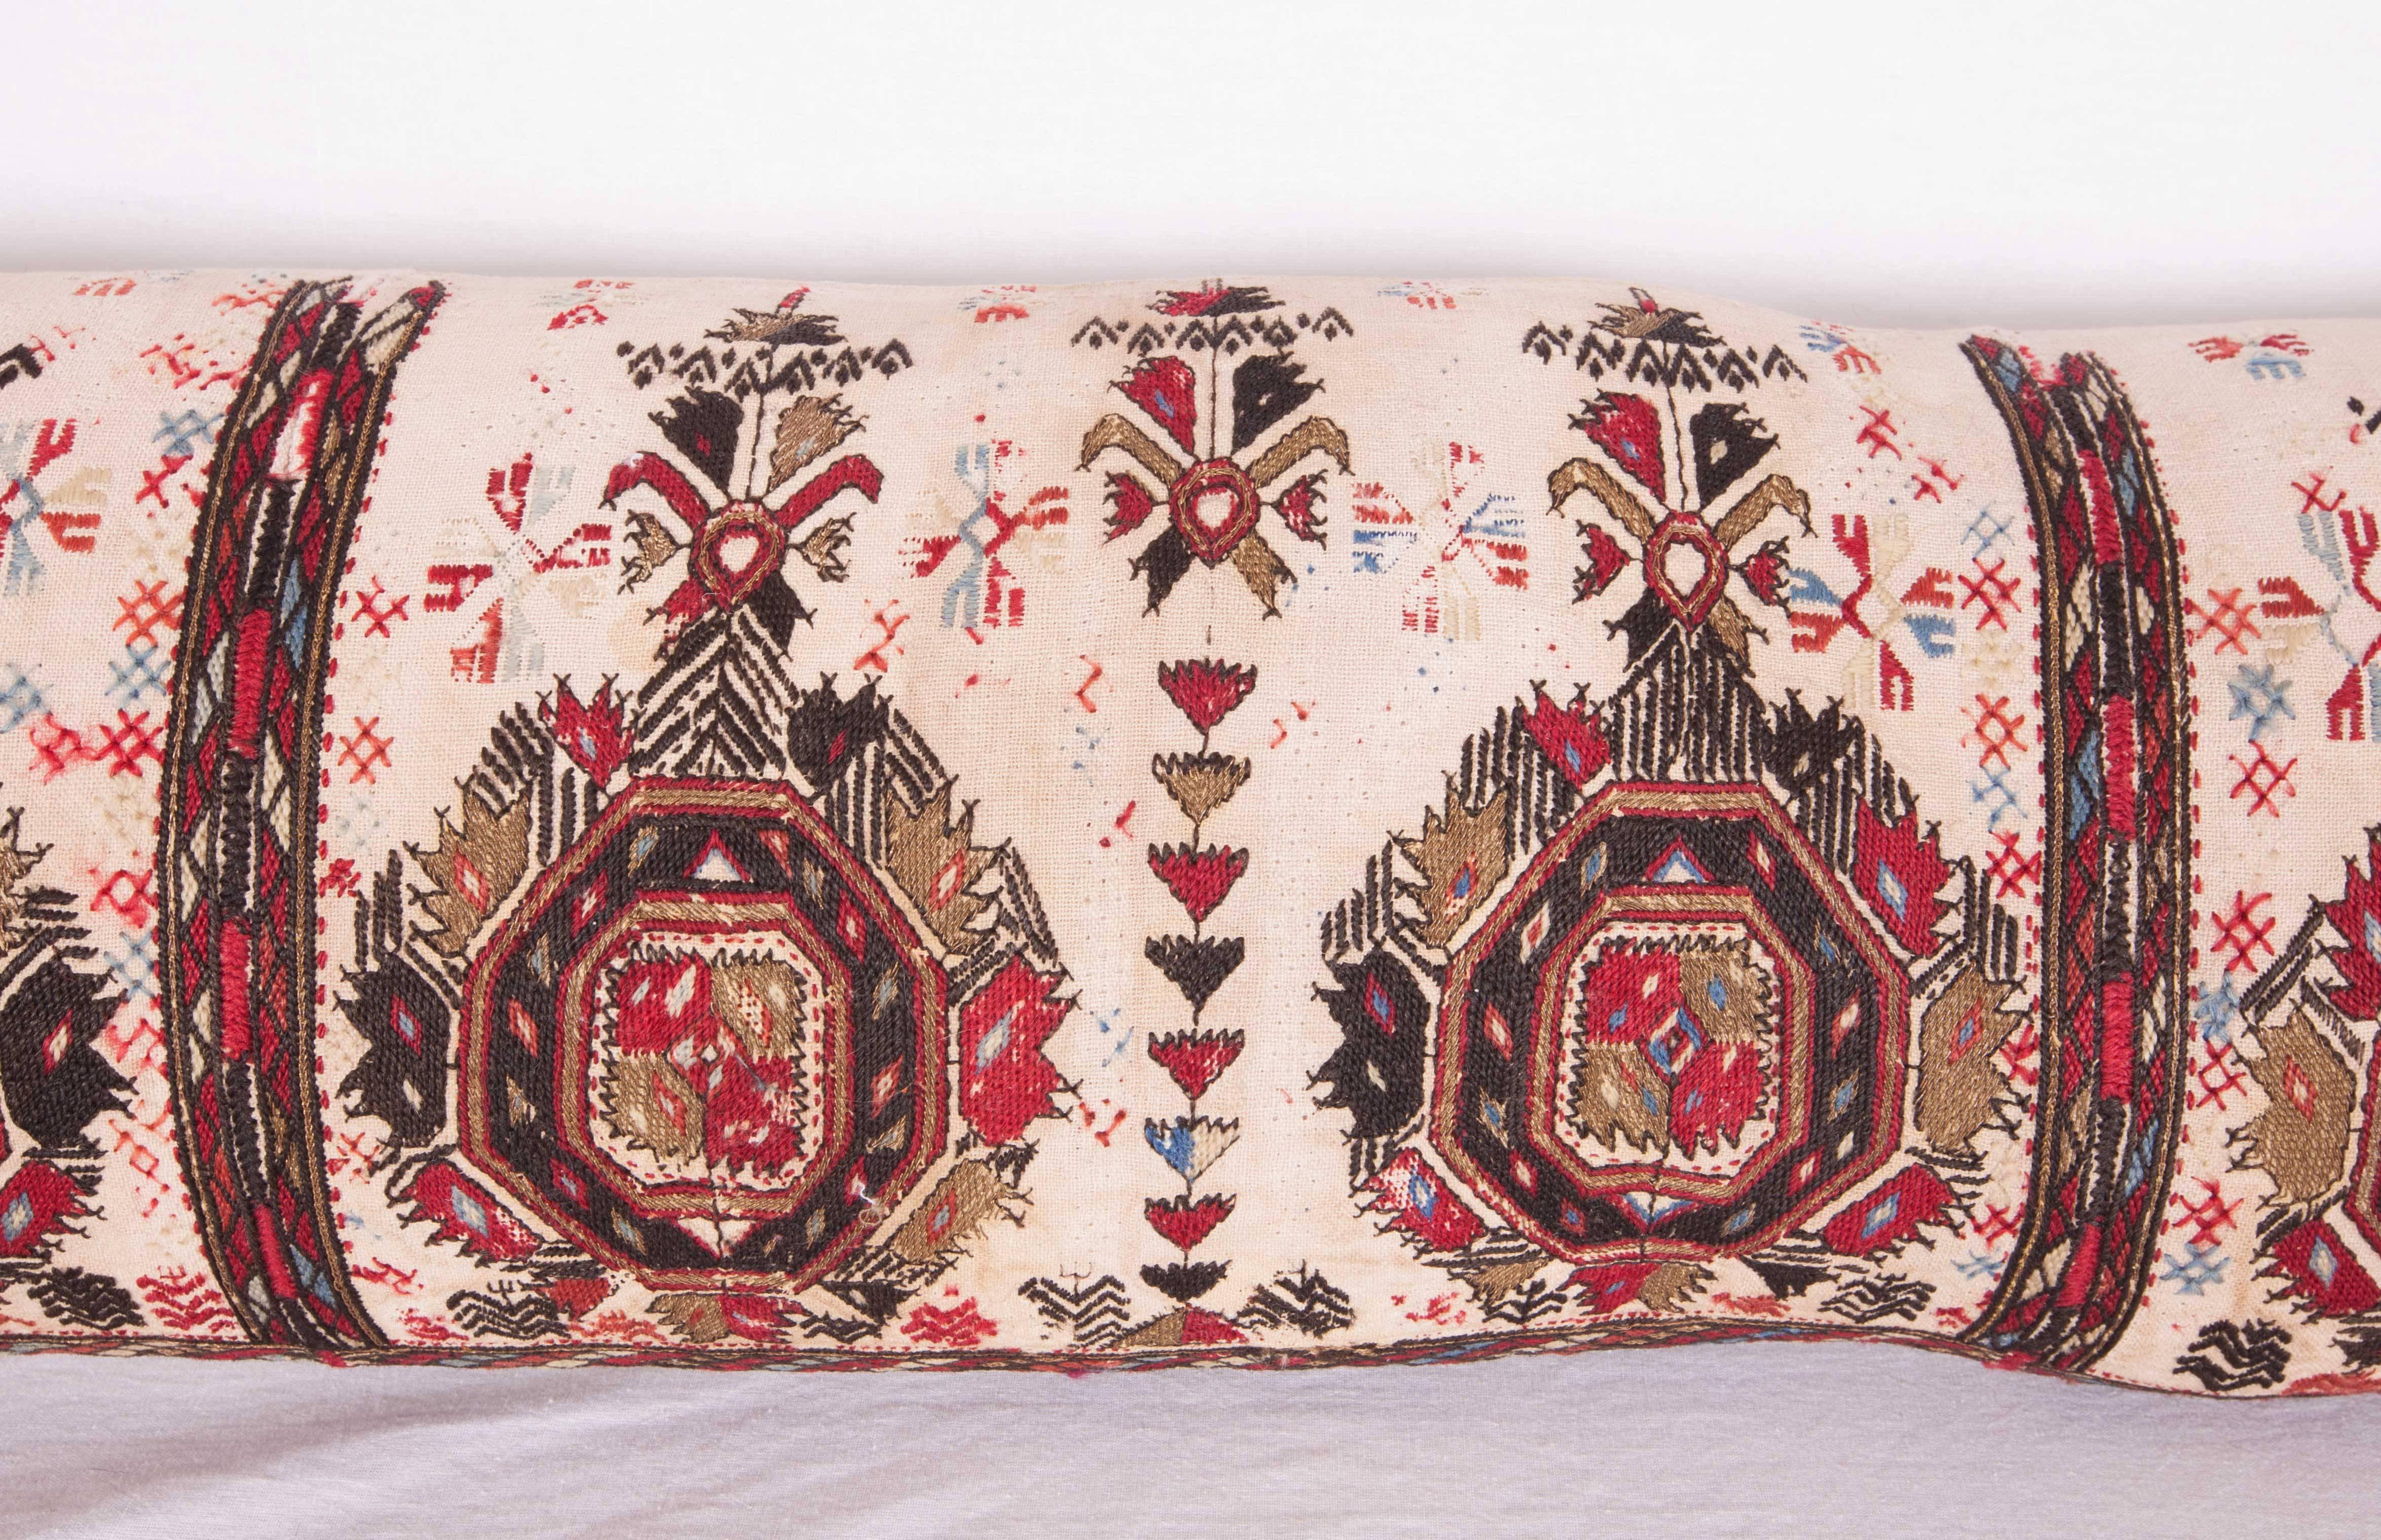 Pillow case is made from an antique 19th century Macedonian Greek embroidery. It does not come with an insert but comes with a bag made to the size and out of cotton to accommodate the filling. The backing is made of linen. Please note filling is